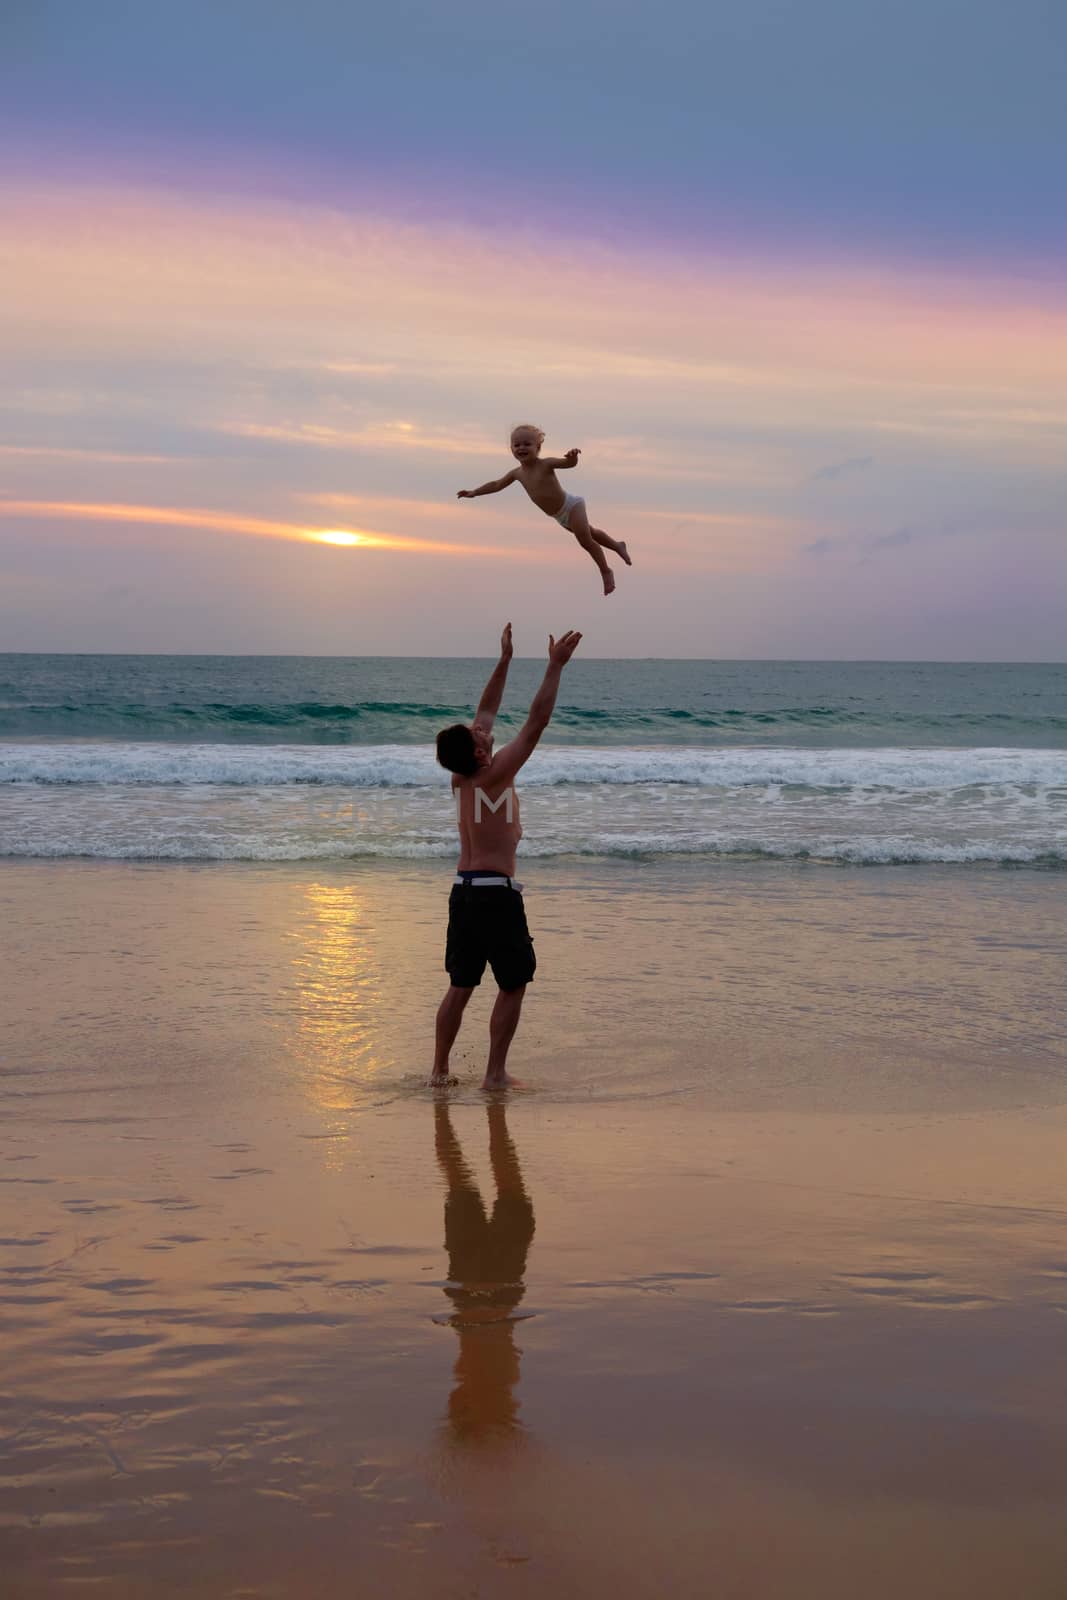 Father throws his daugter at the beach near the sea at the spectacular cloudy sunset